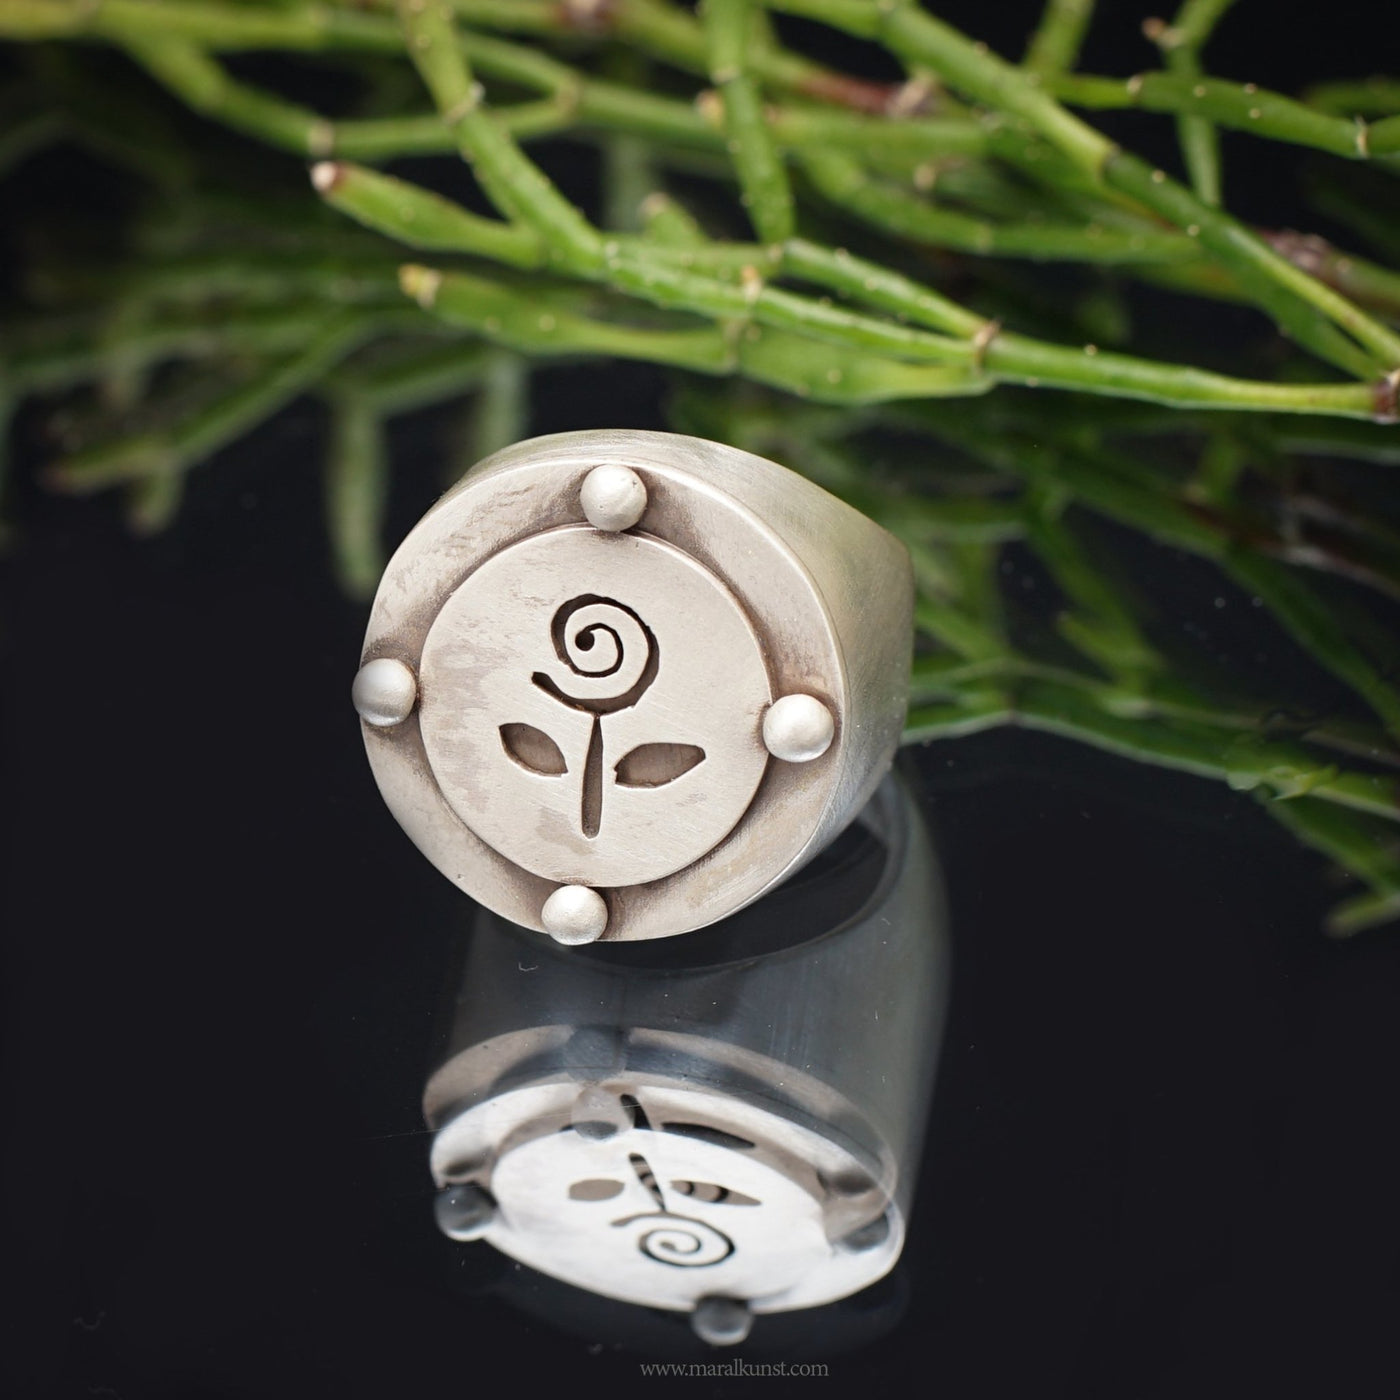 Unique Iranian Flower Silver Ring - Maral Kunst Jewelry